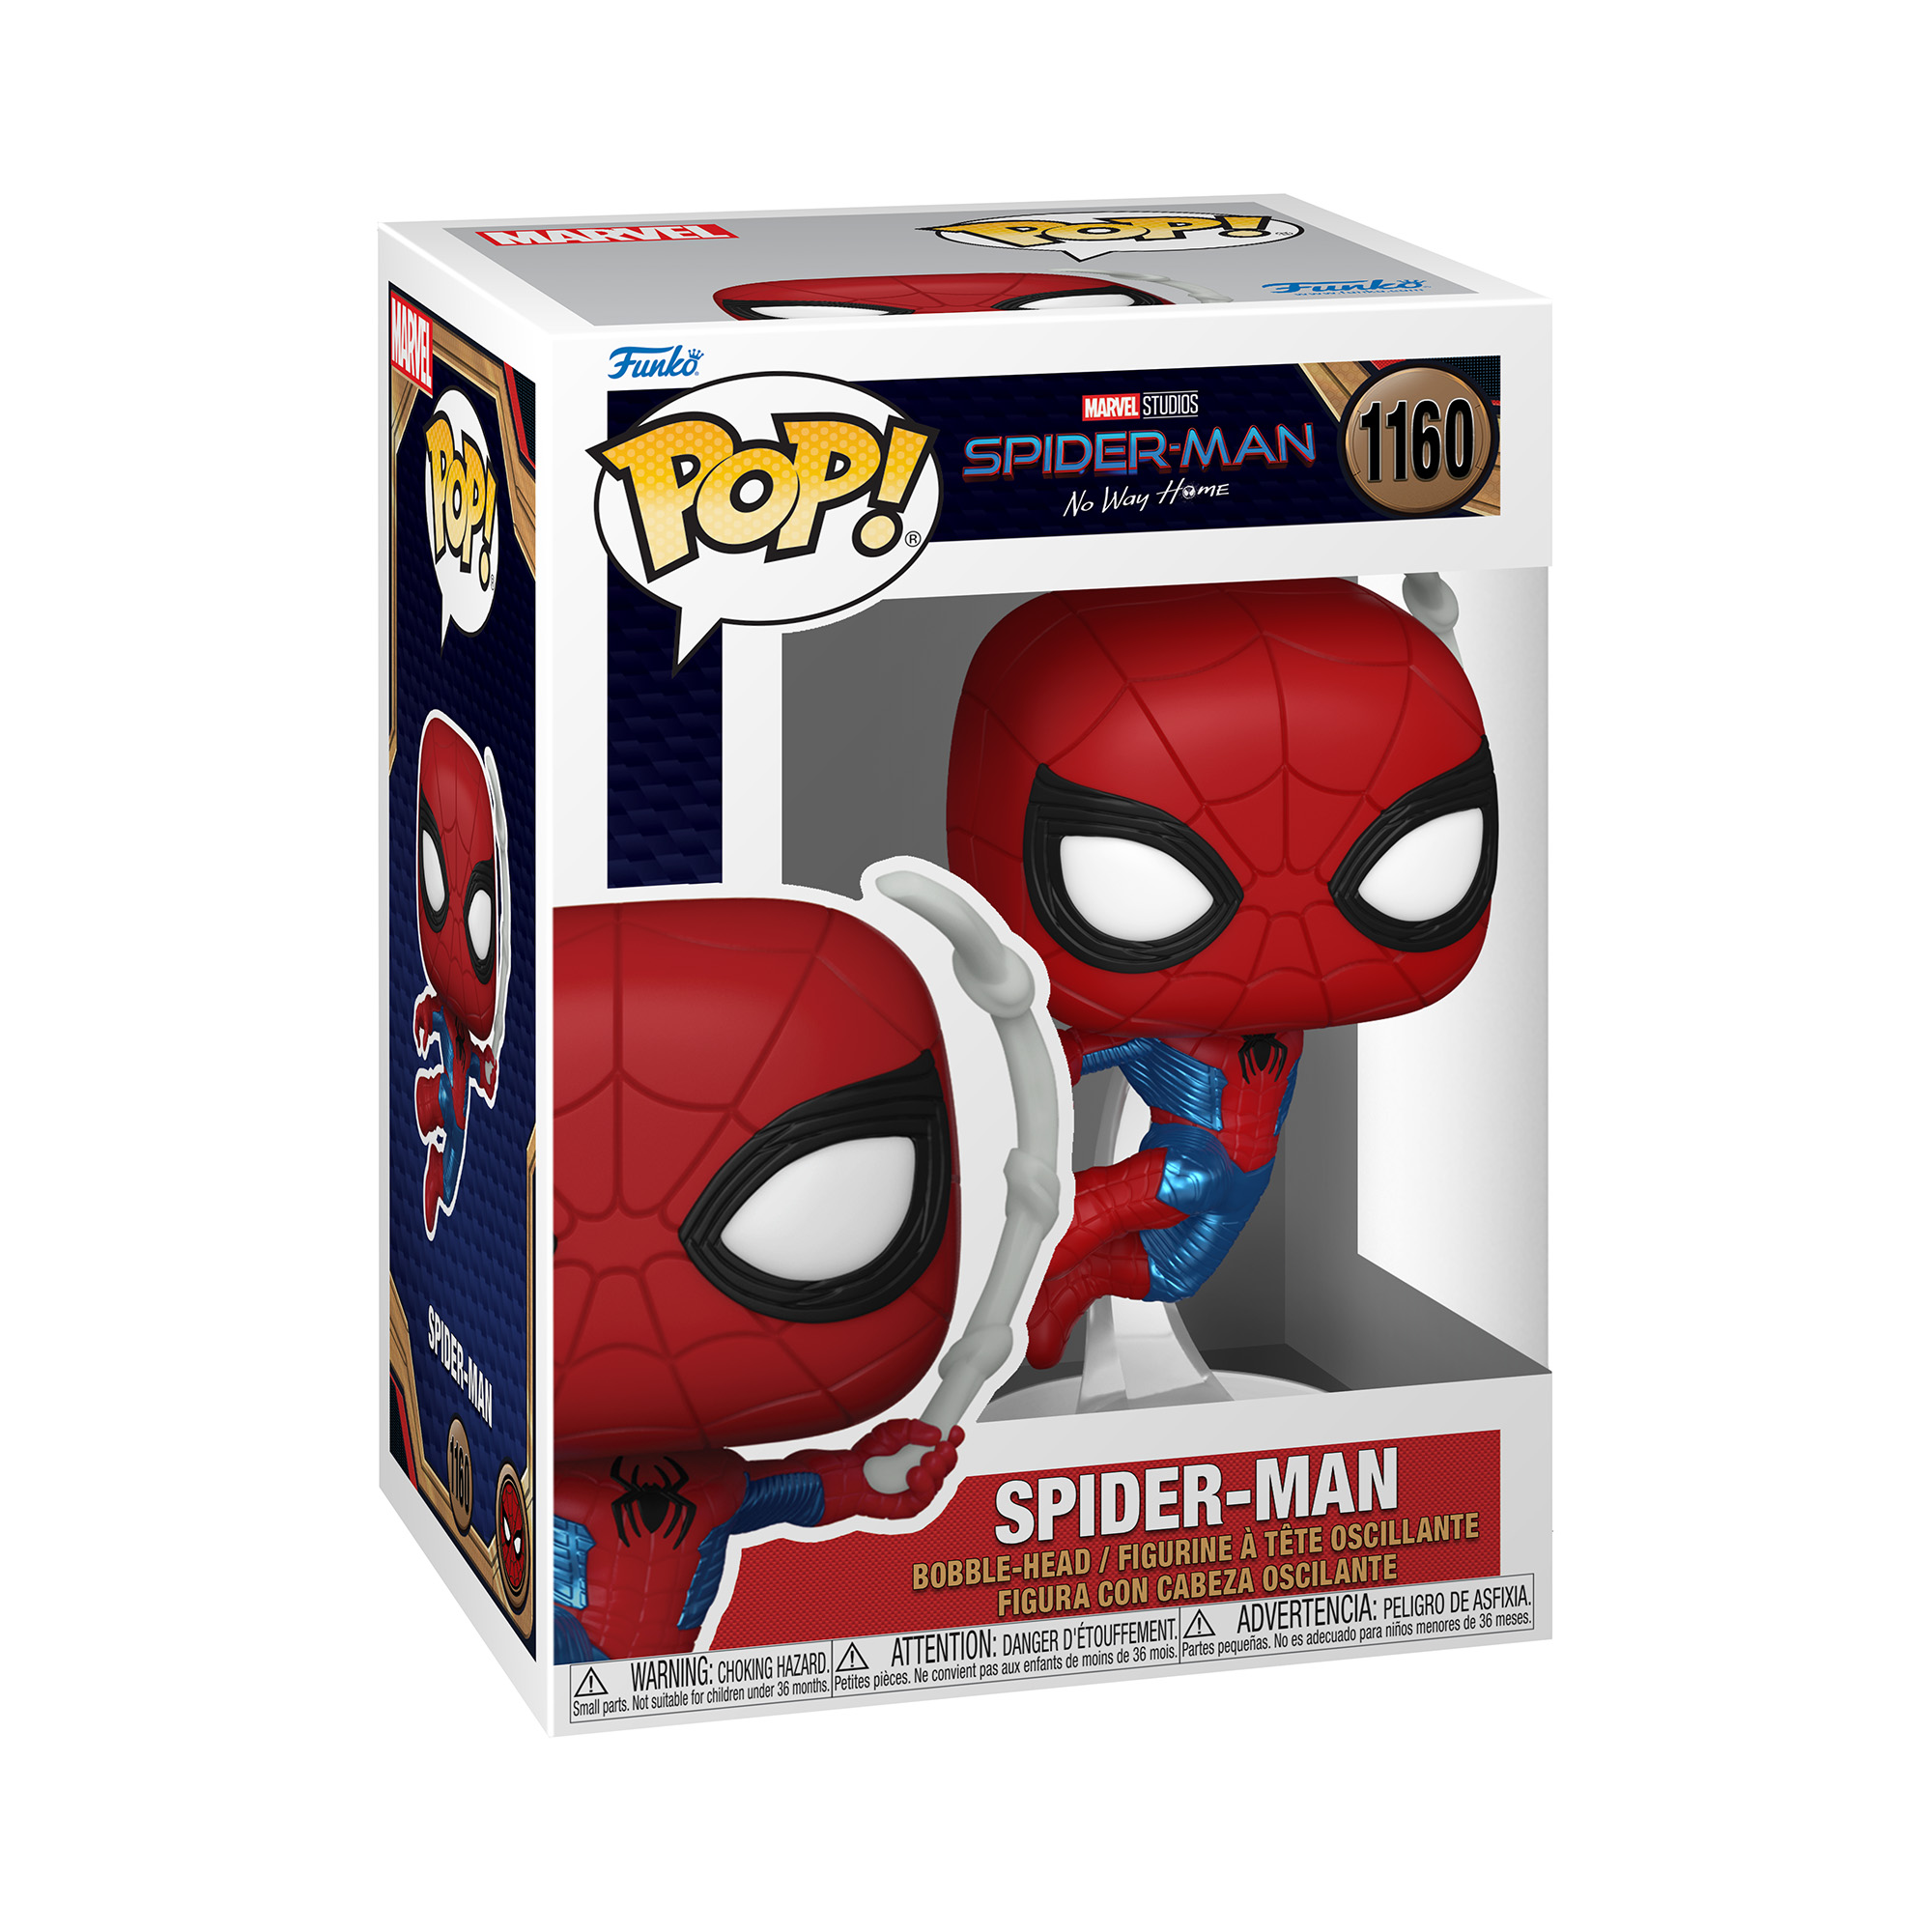 In-box look at Pop! Spider-Man from Spider-Man: No Way Home.